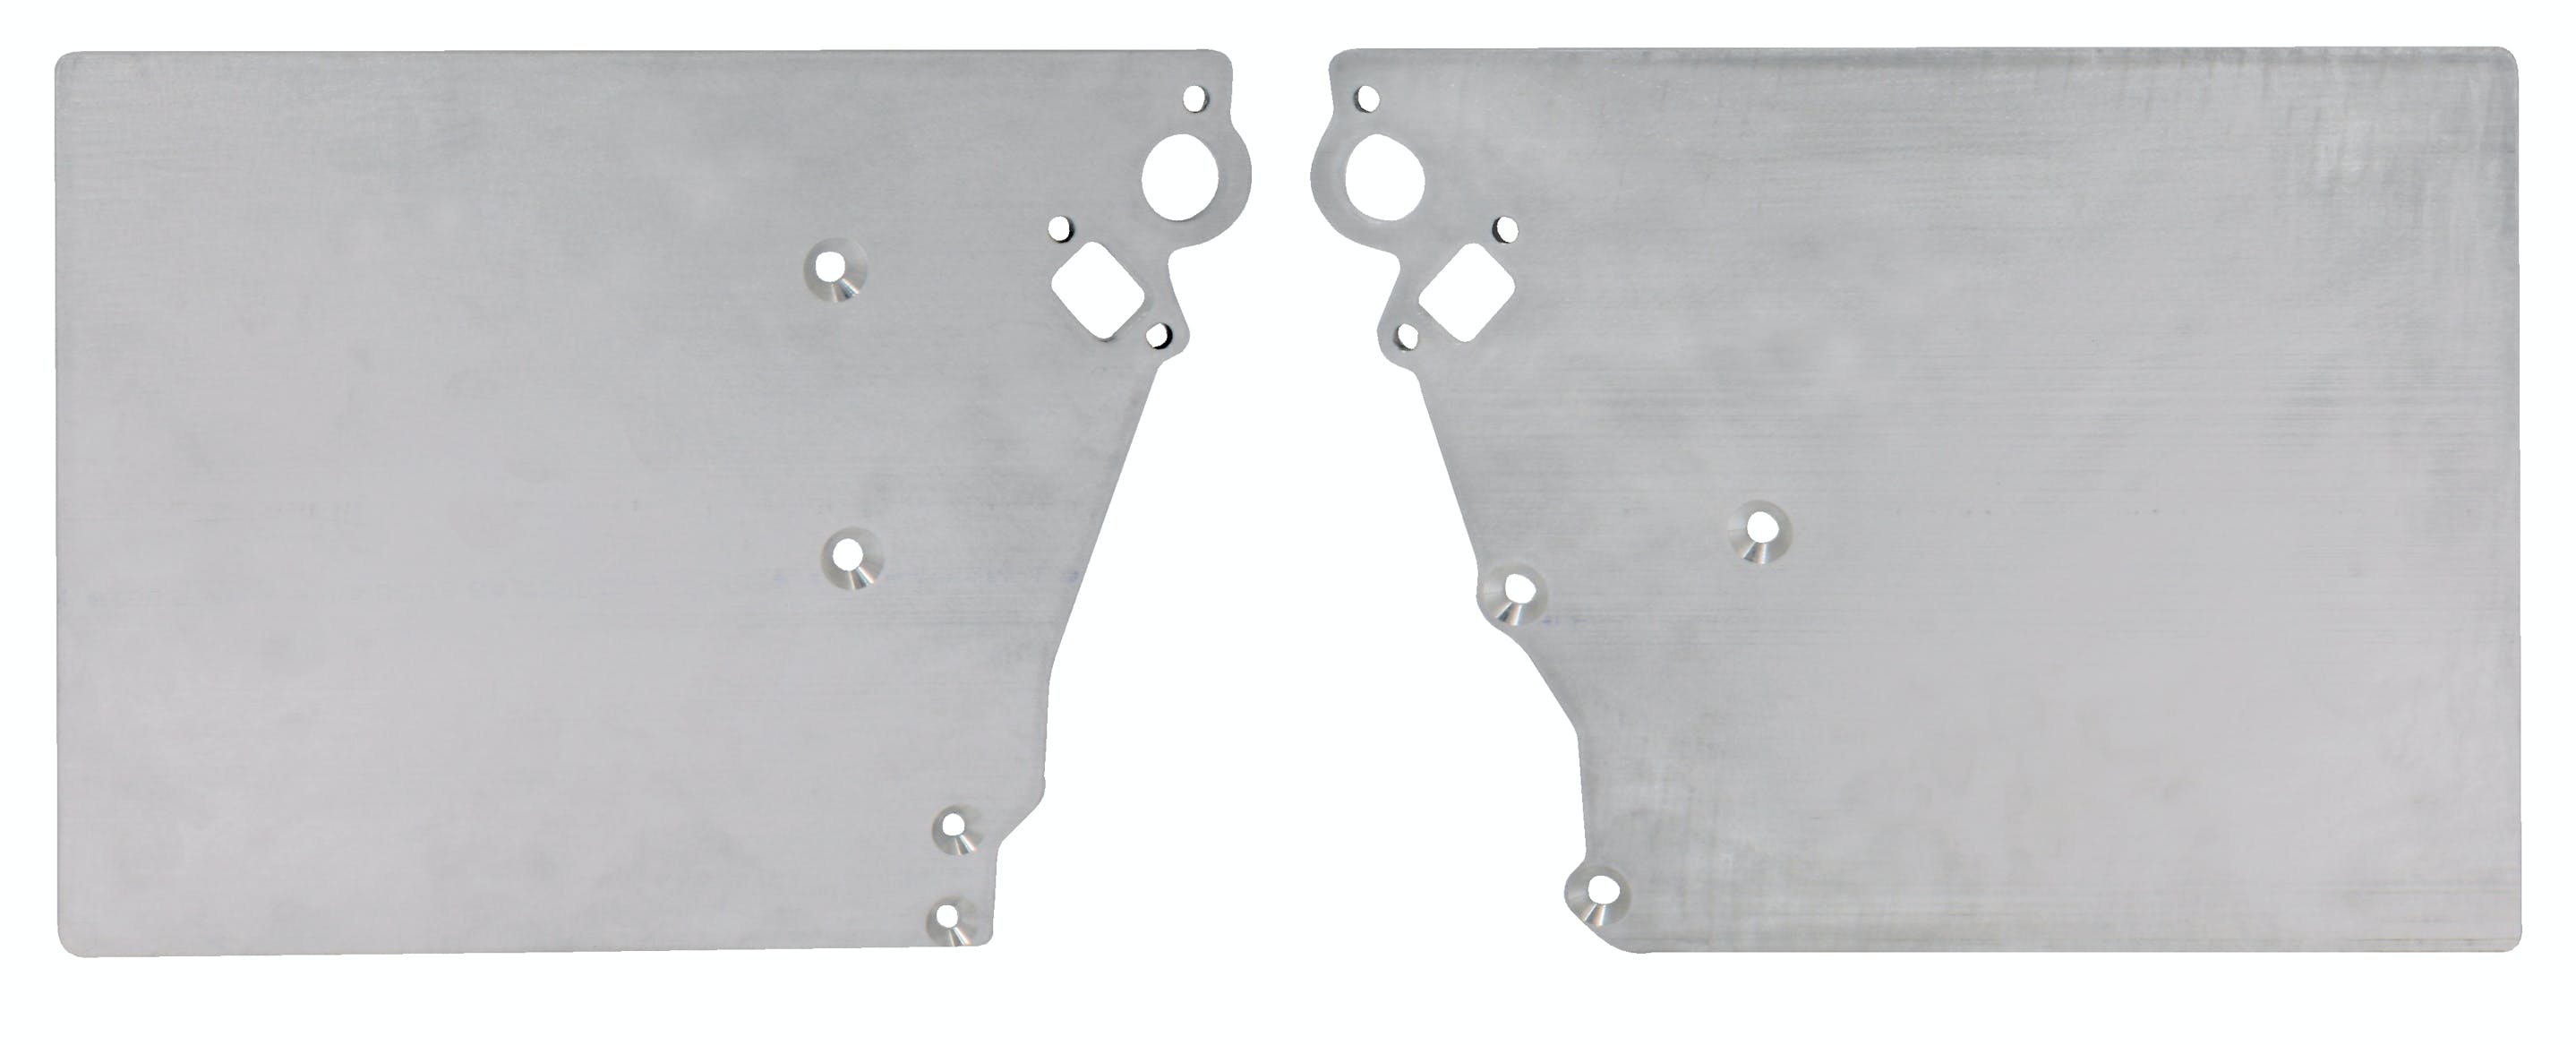 Competition Engineering C3995 Motor Plate, Aluminum LS1, Two Plate Design, 1/4 Inch Thick 6061-T6